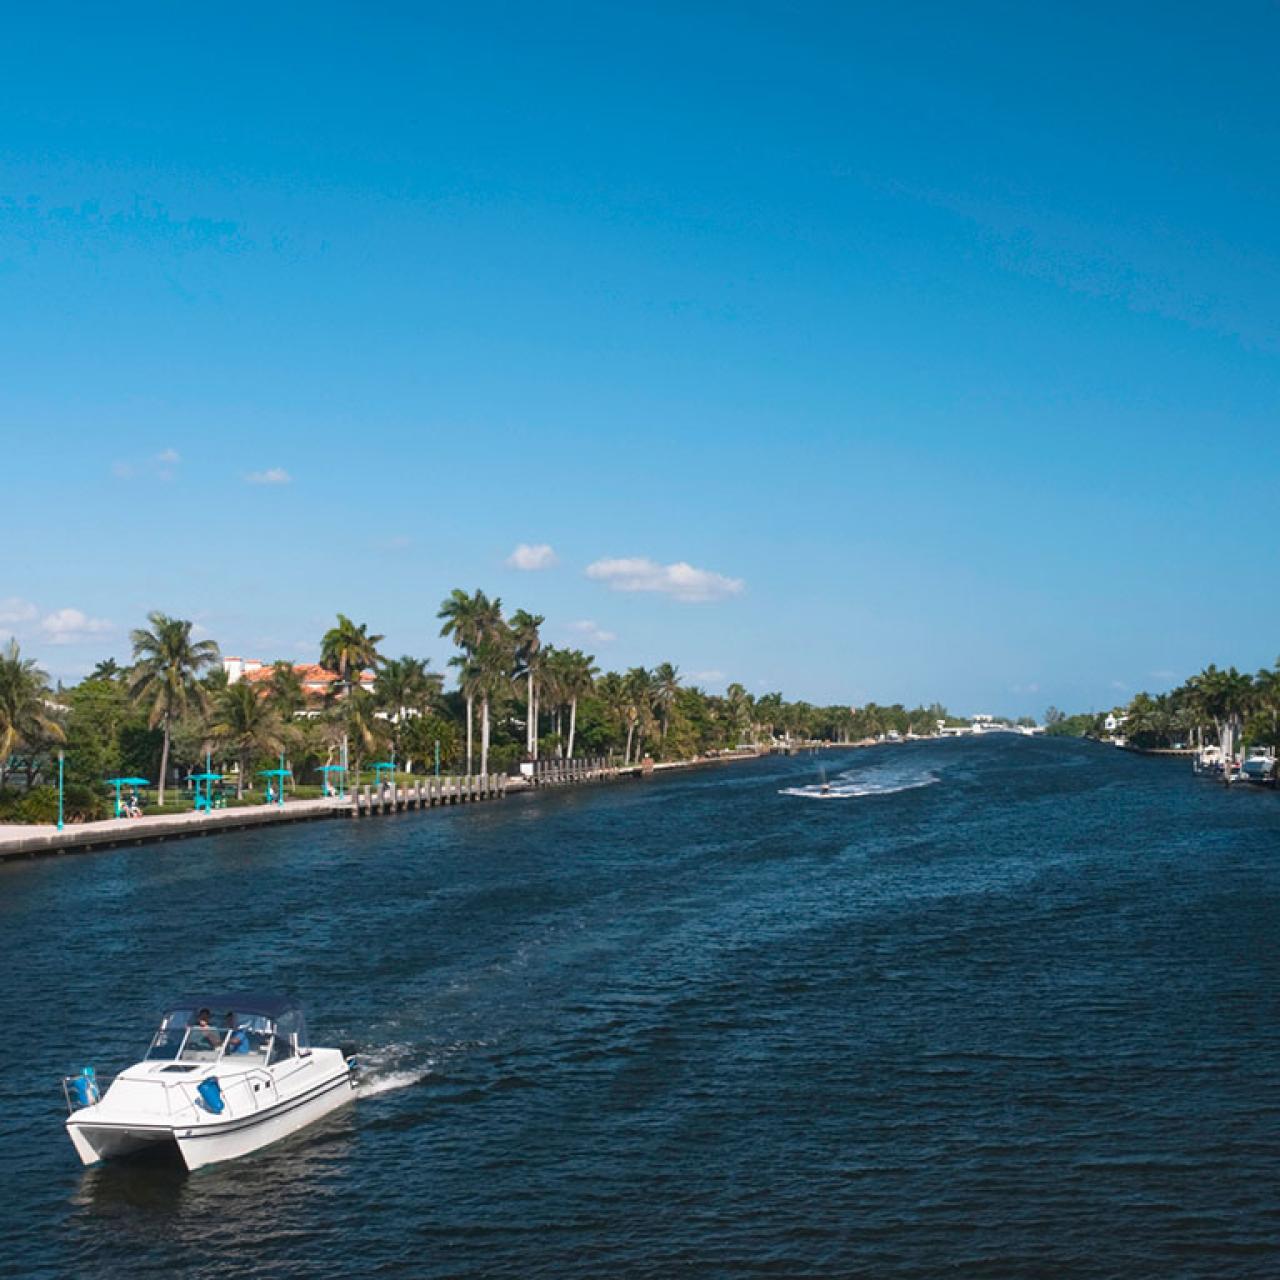 Palm Beach Gardens Travel Guide 2023 - Things to Do, What To Eat & Tips